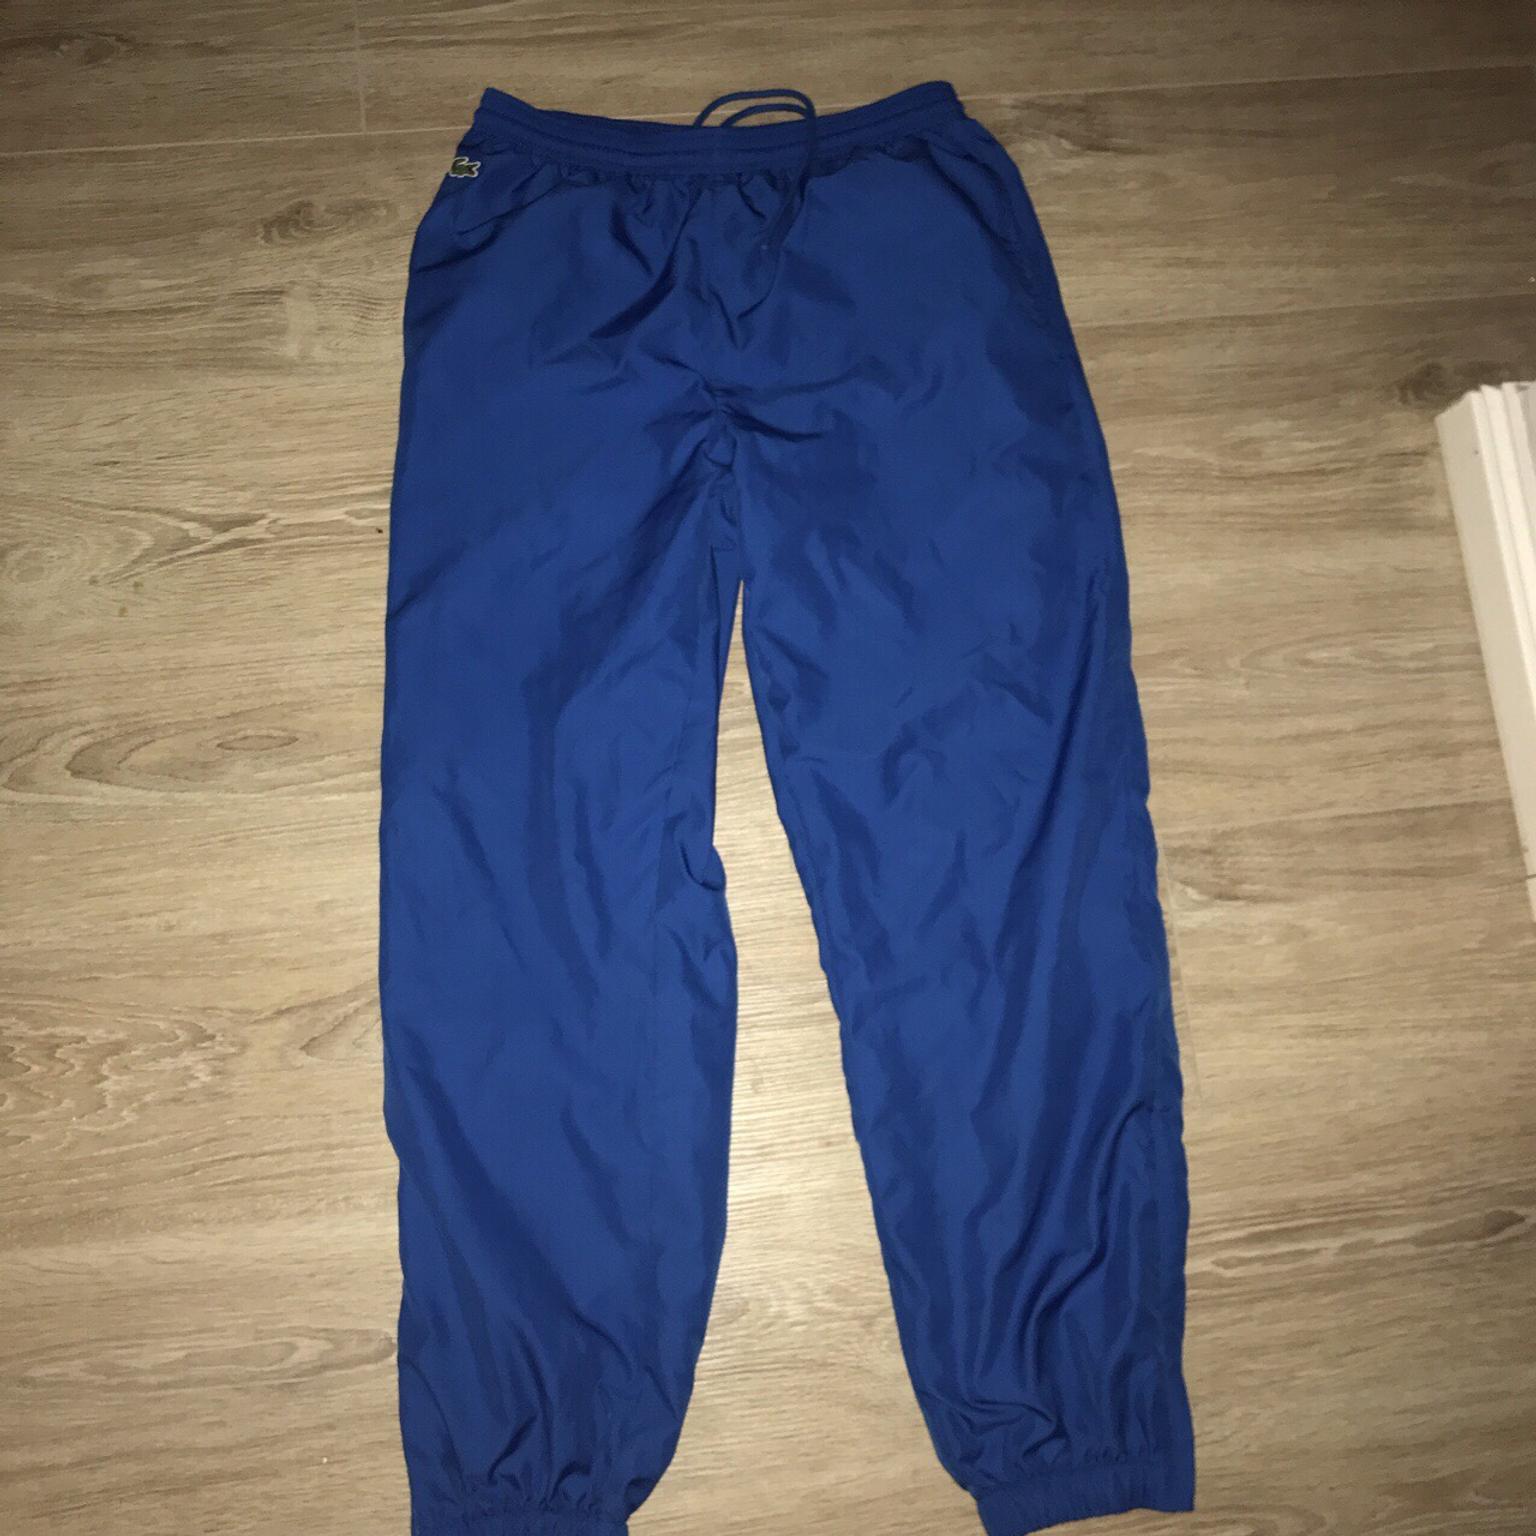 Red Lacoste Guppy Tracksuit Bottoms Joggers 4 in Newton Mearns for £30. ...